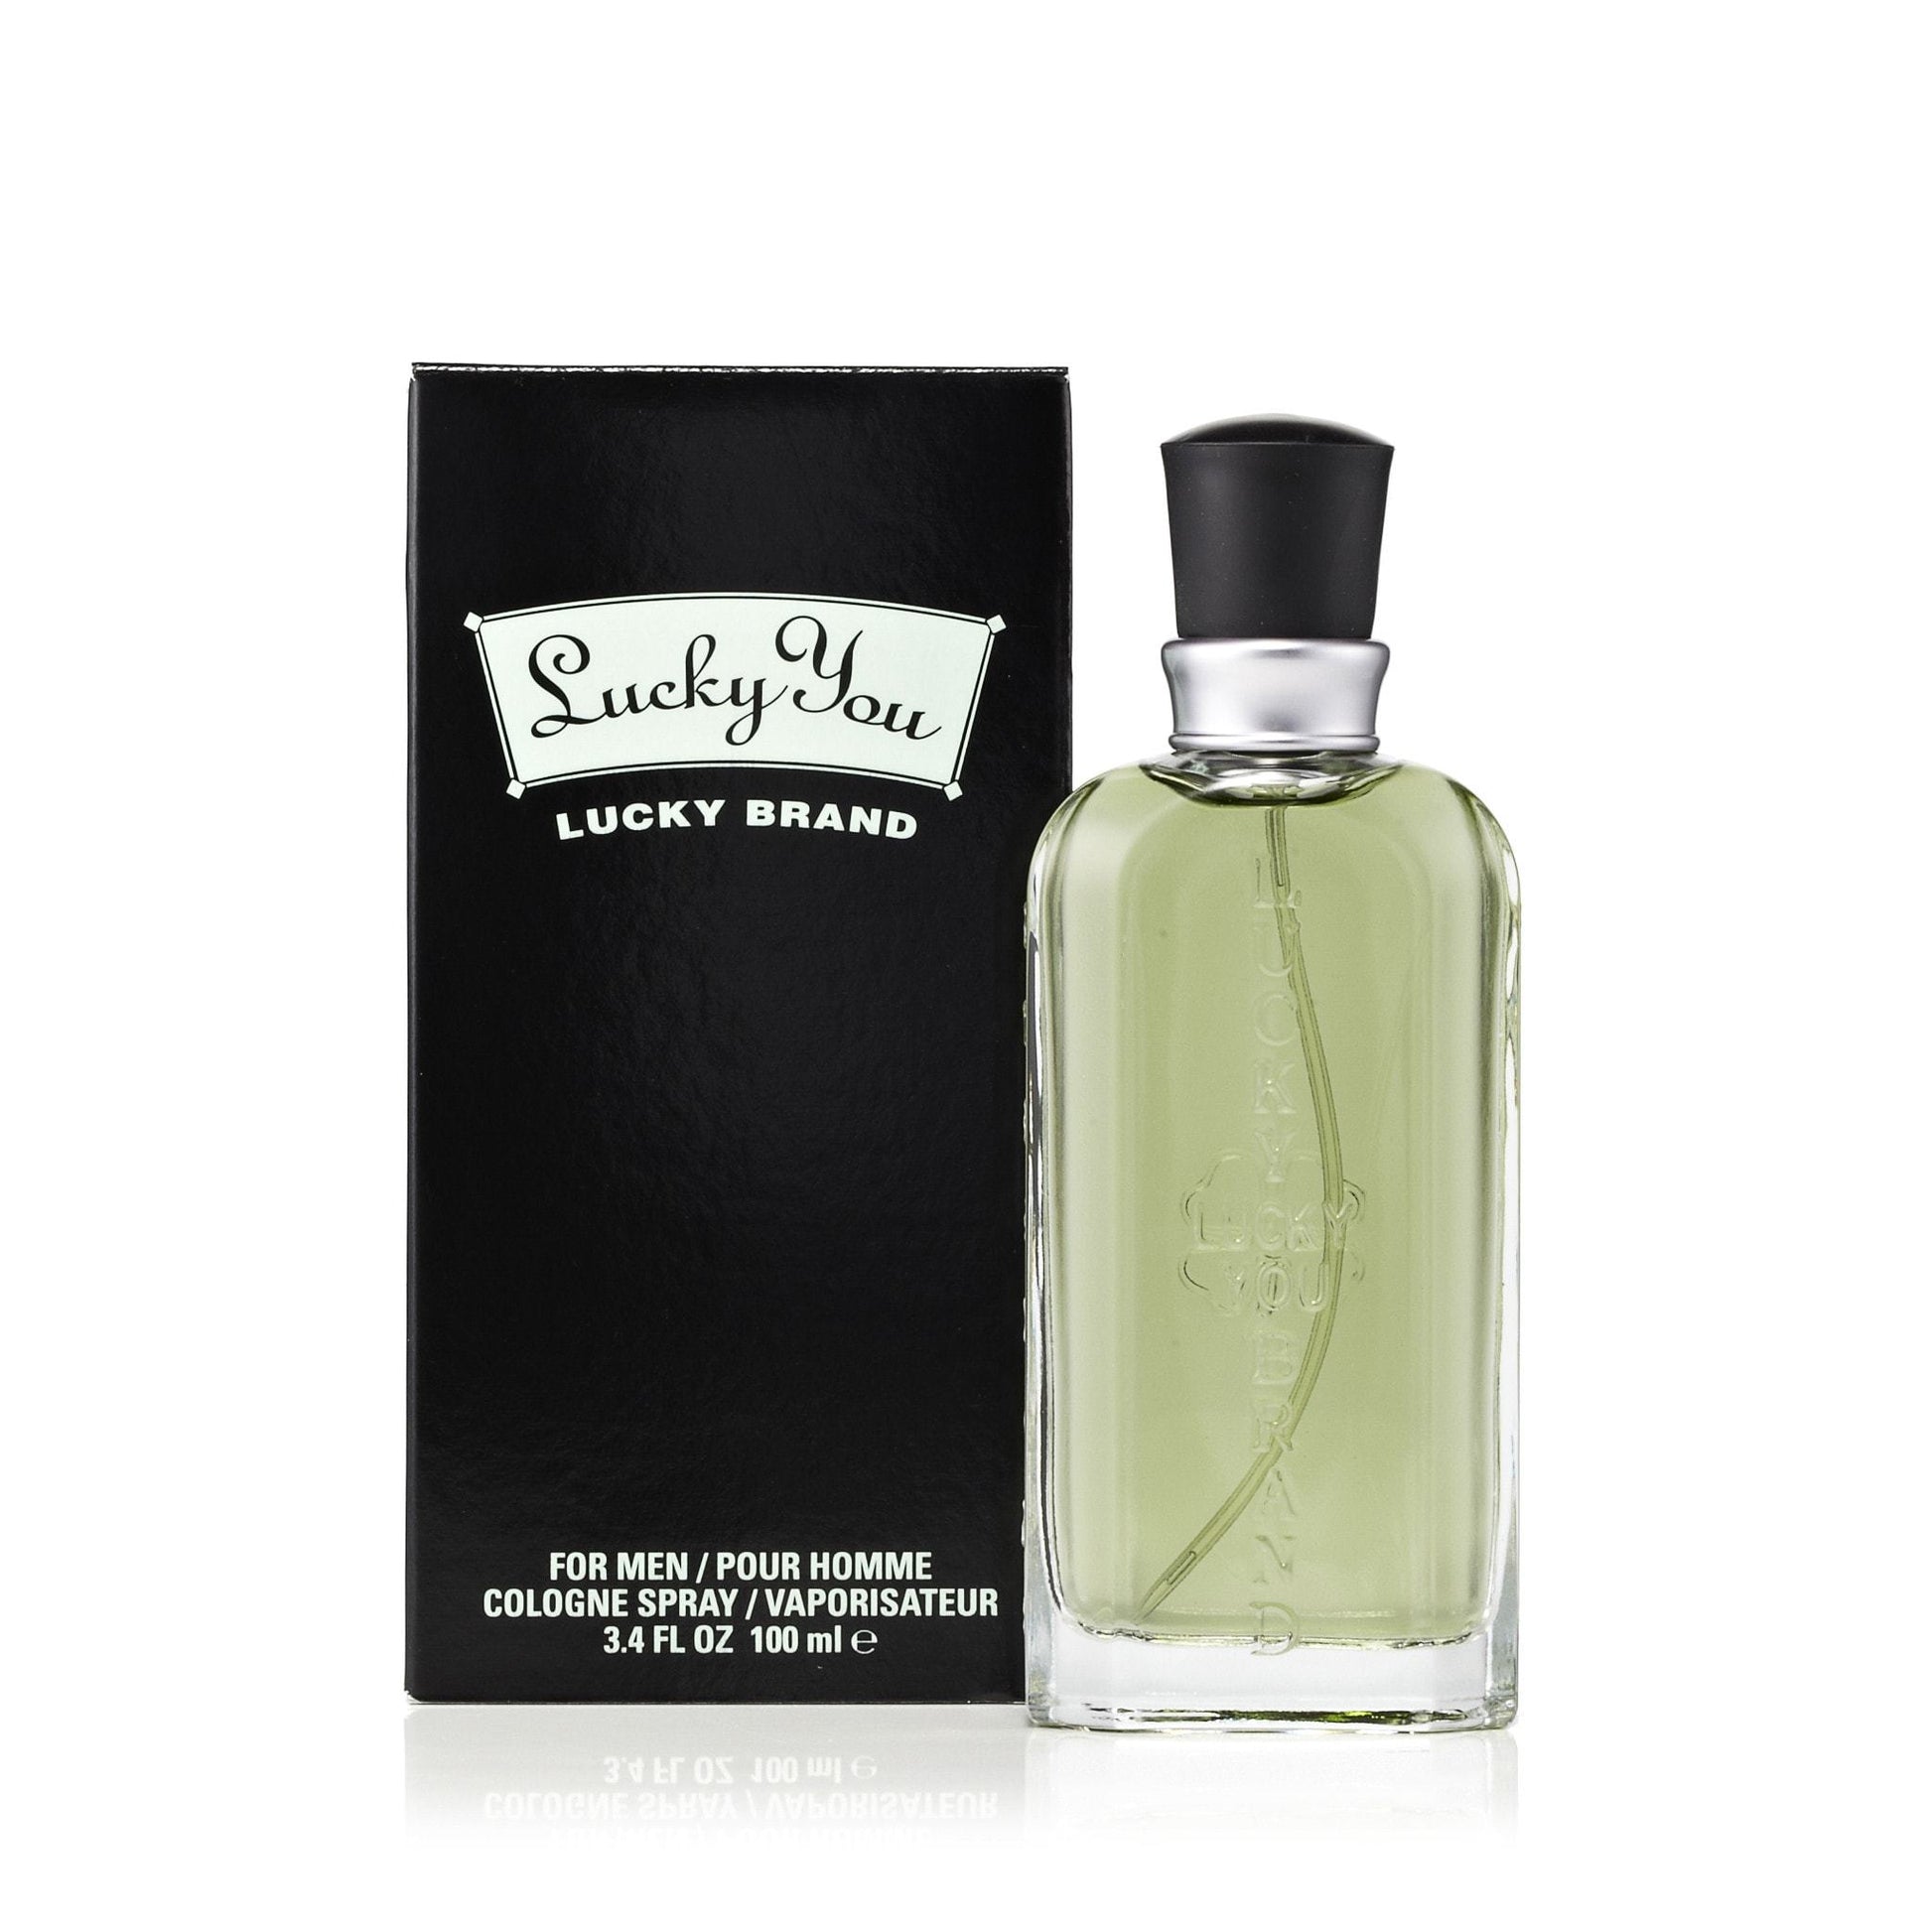 Lucky You Cologne Spray for Men by Claiborne, Product image 3